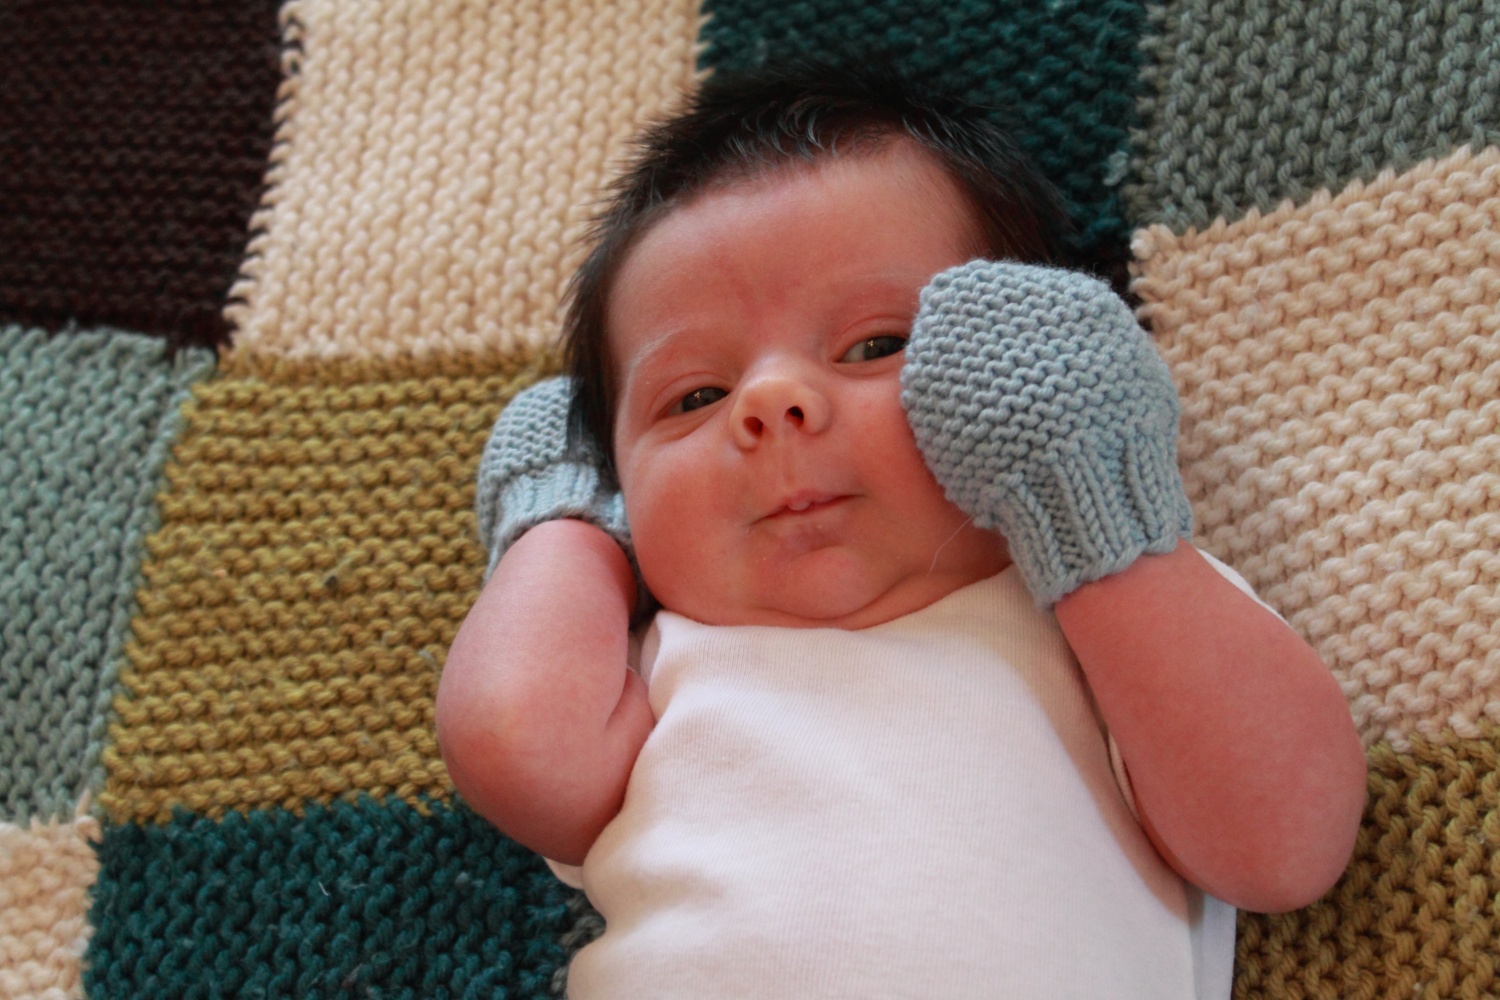 Are Baby Mittens Bad For Development?